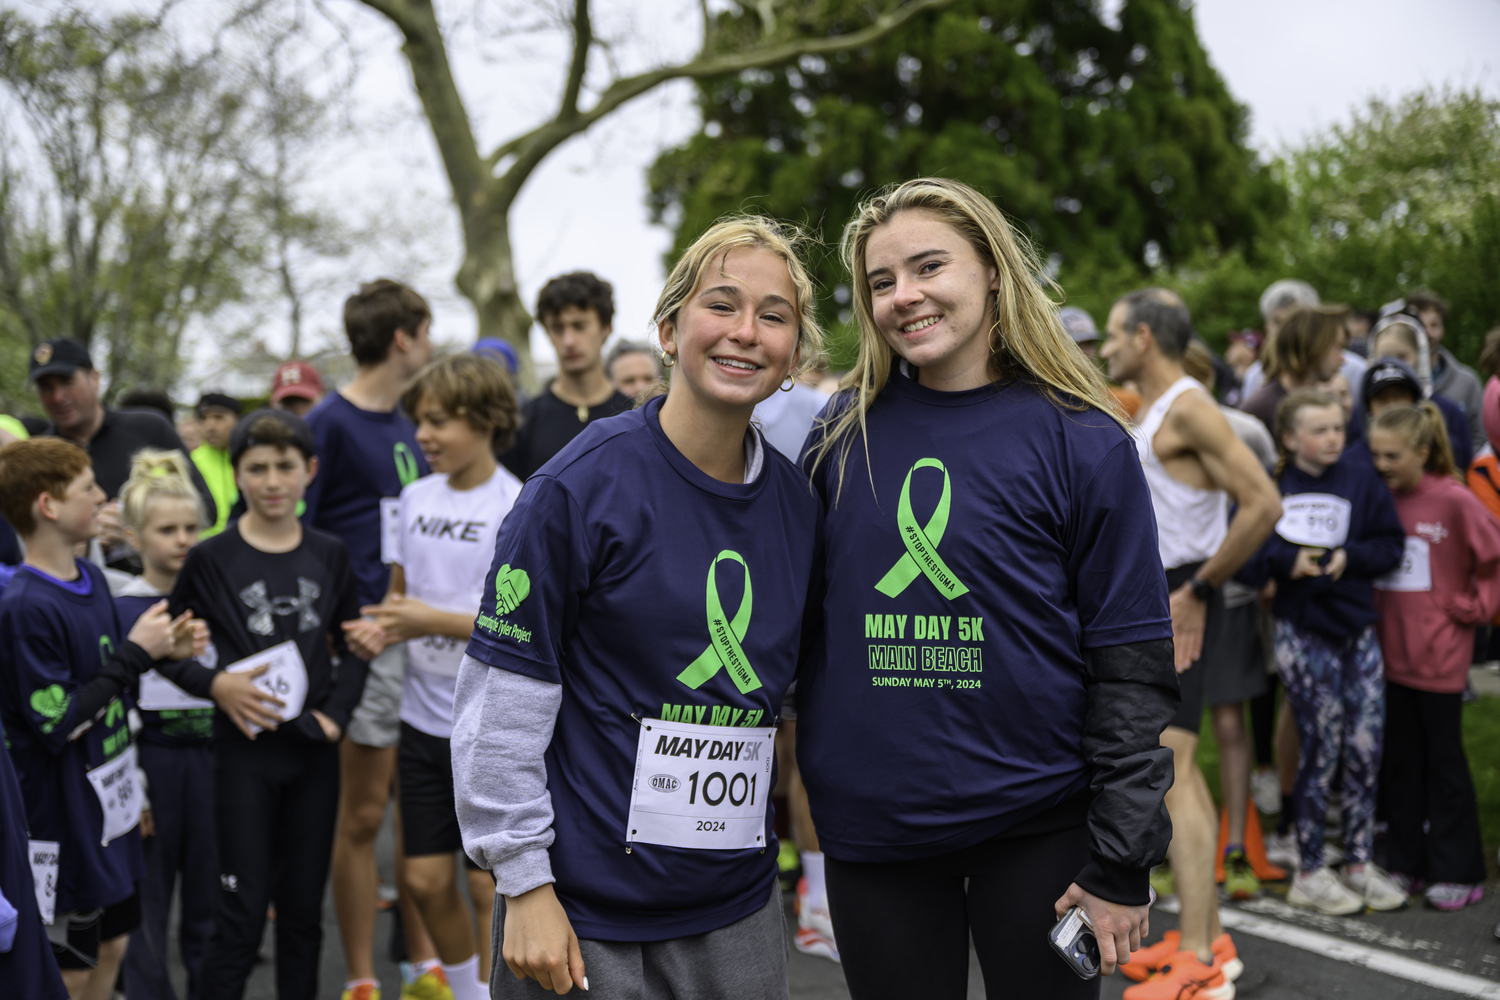 The cofounders of the OMAC May Day 5K, Dylan Cashin, left, and Ryleigh O'Donnell.   MARIANNE BARNETT